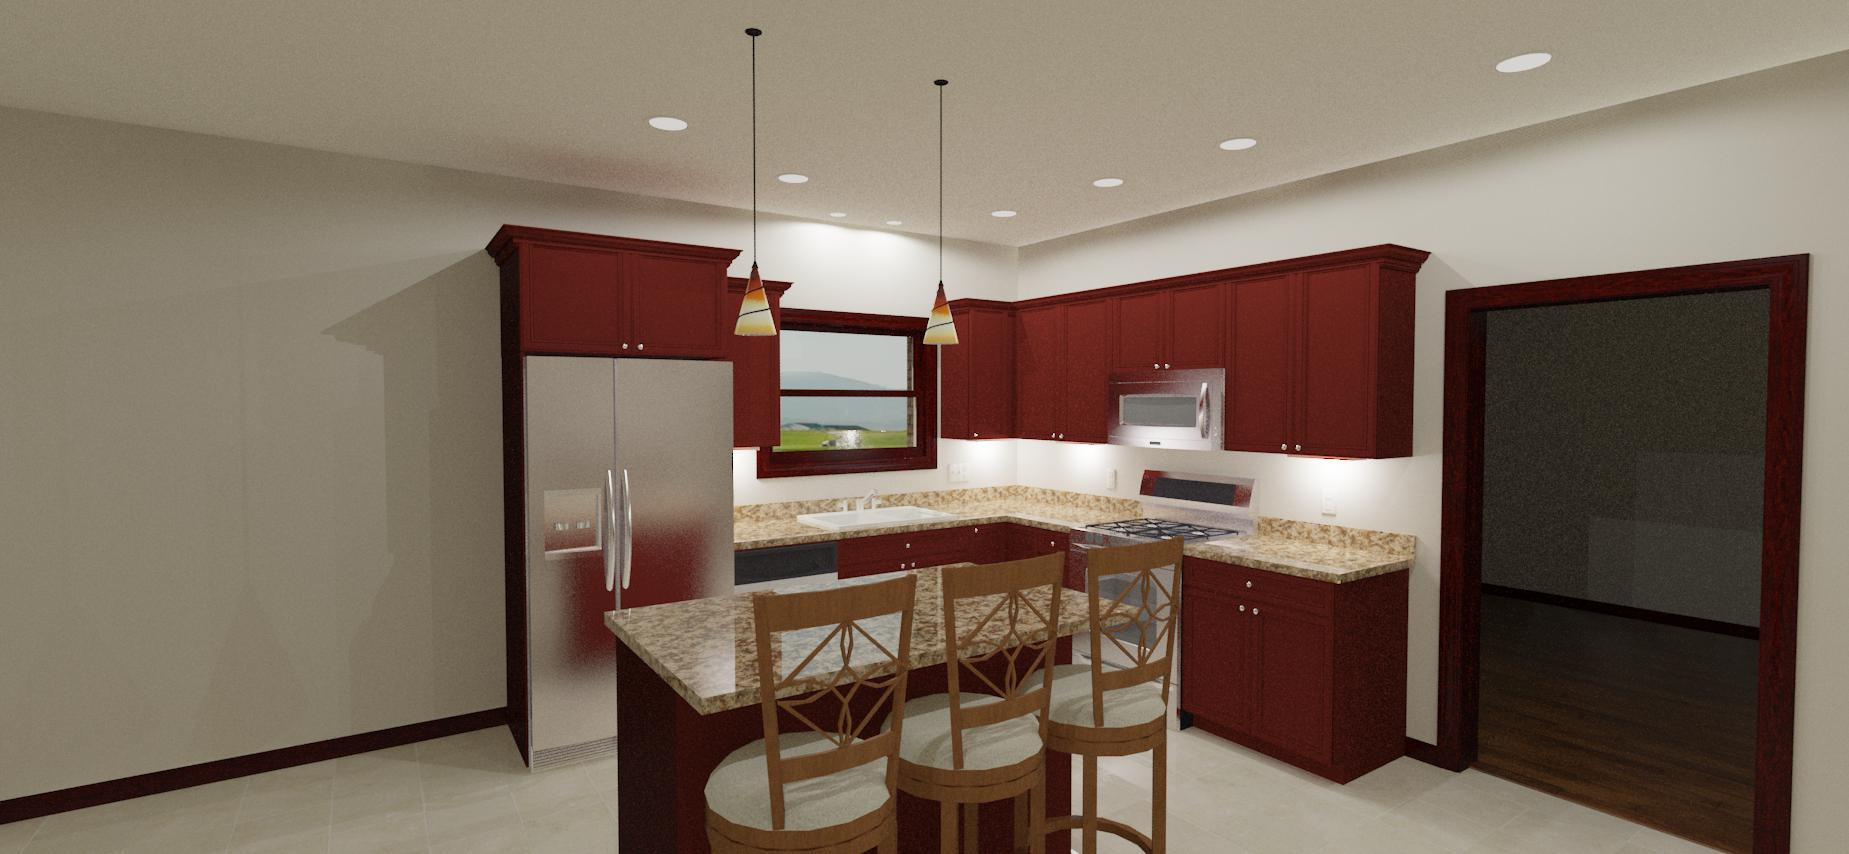 Recessed Lighting Spacing Kitchen
 New Kitchen Recessed Lighting Layout Electrician Talk